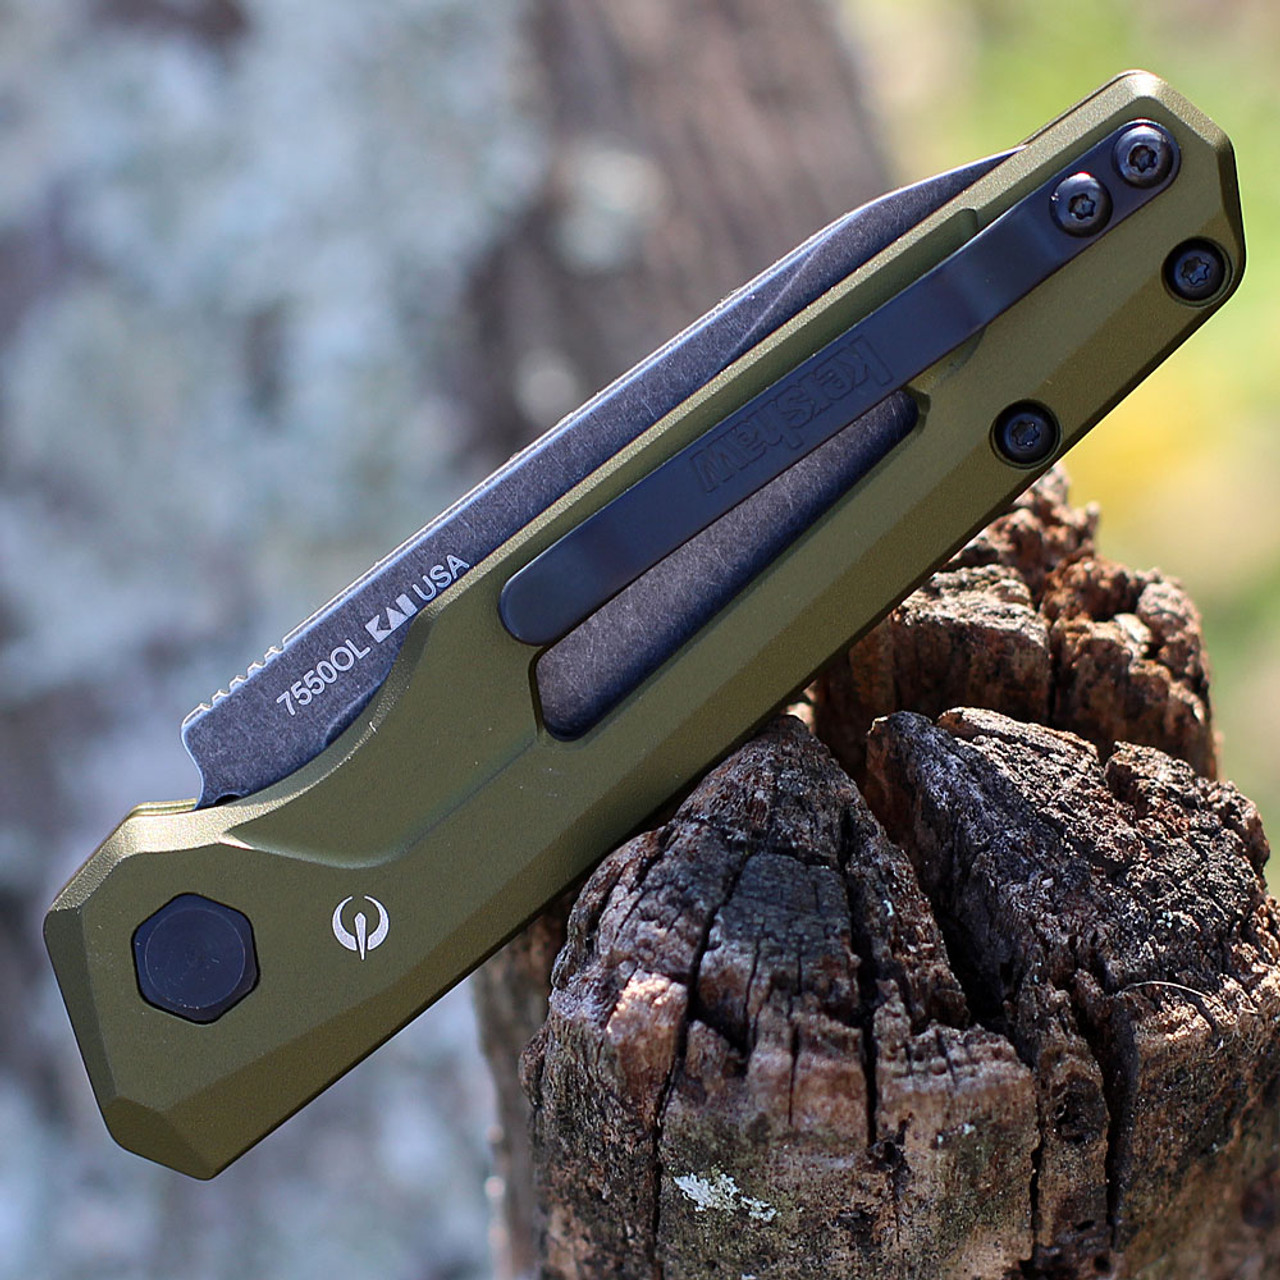 Kershaw Launch 11 Automatic Knife (7550OL)- 2.75" Blackwashed CPM-154 Drop Point Blade, OD Green Aluminum Handle